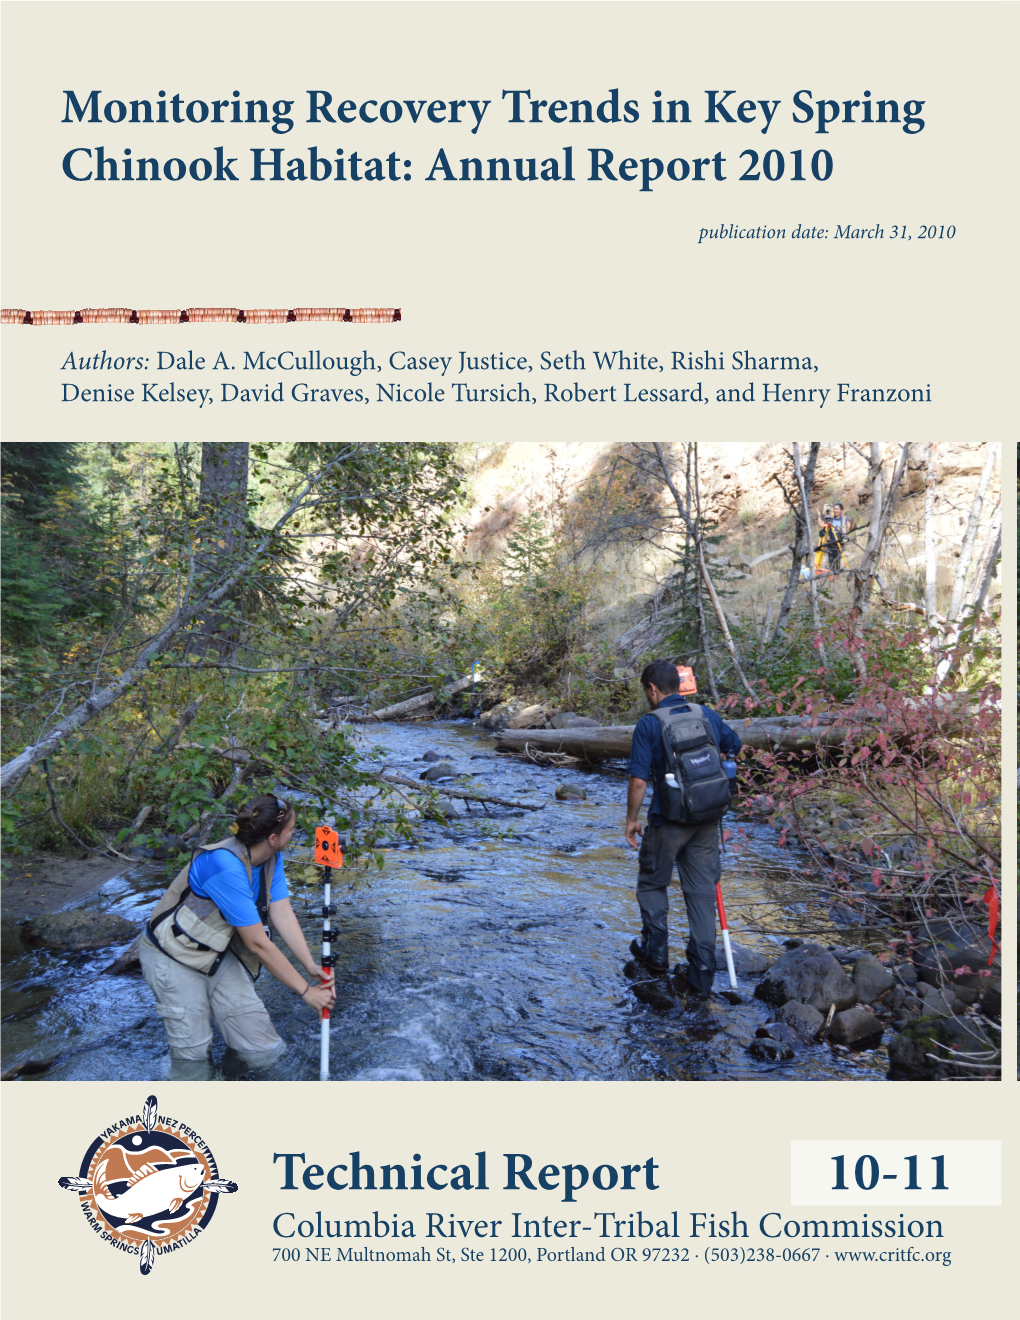 Monitoring Recovery Trends in Key Spring Chinook Habitat: Annual Report 2010 Publication Date: March 31, 2010